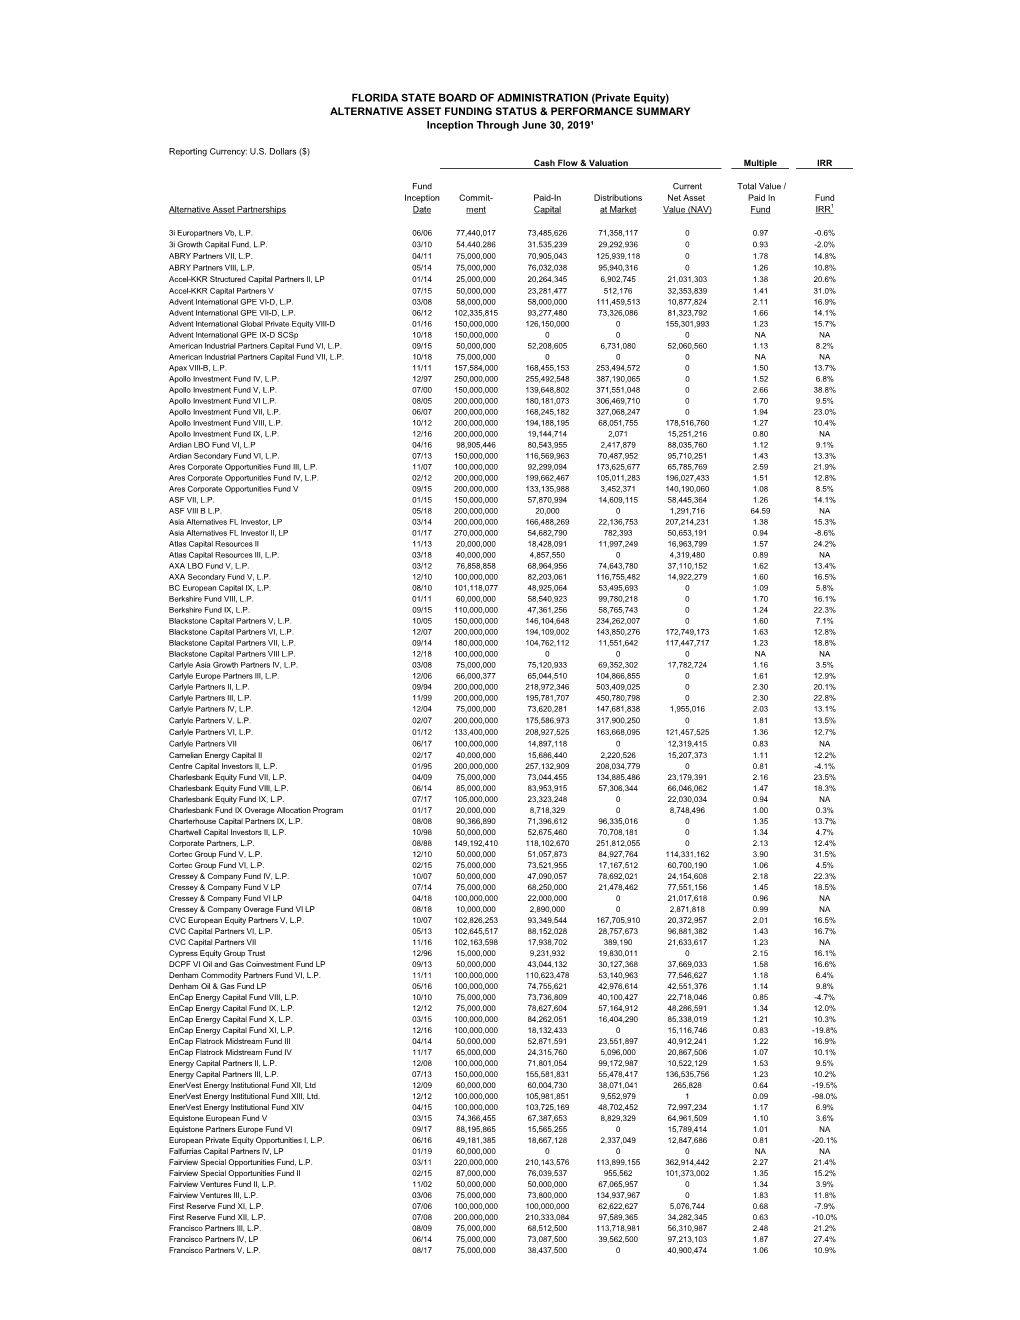 FLORIDA STATE BOARD of ADMINISTRATION (Private Equity) ALTERNATIVE ASSET FUNDING STATUS & PERFORMANCE SUMMARY Inception Through June 30, 2019¹